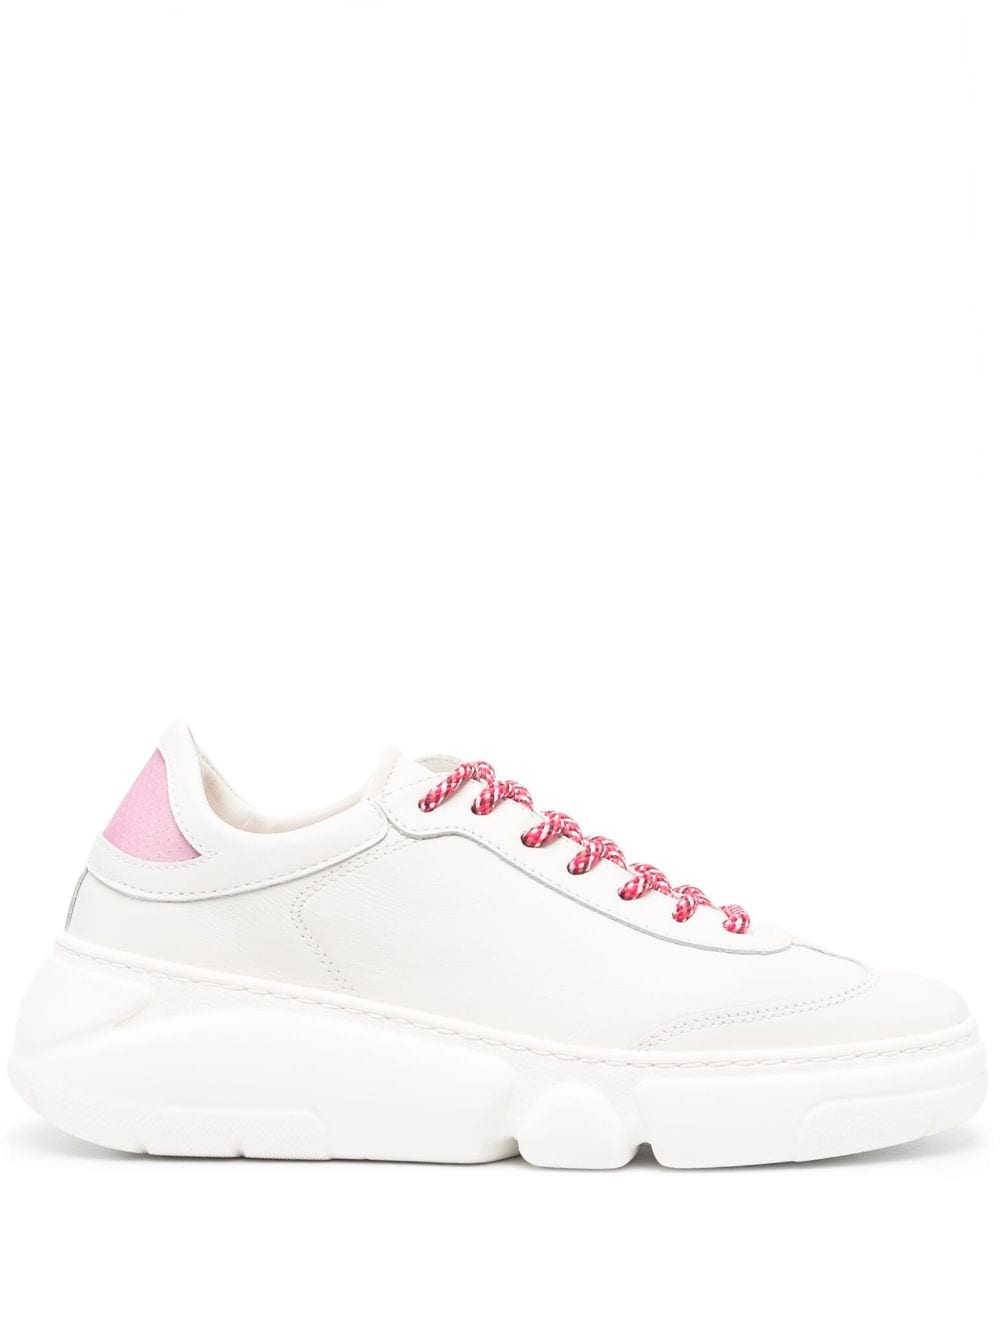 AGL Emilie low-top leather sneakers